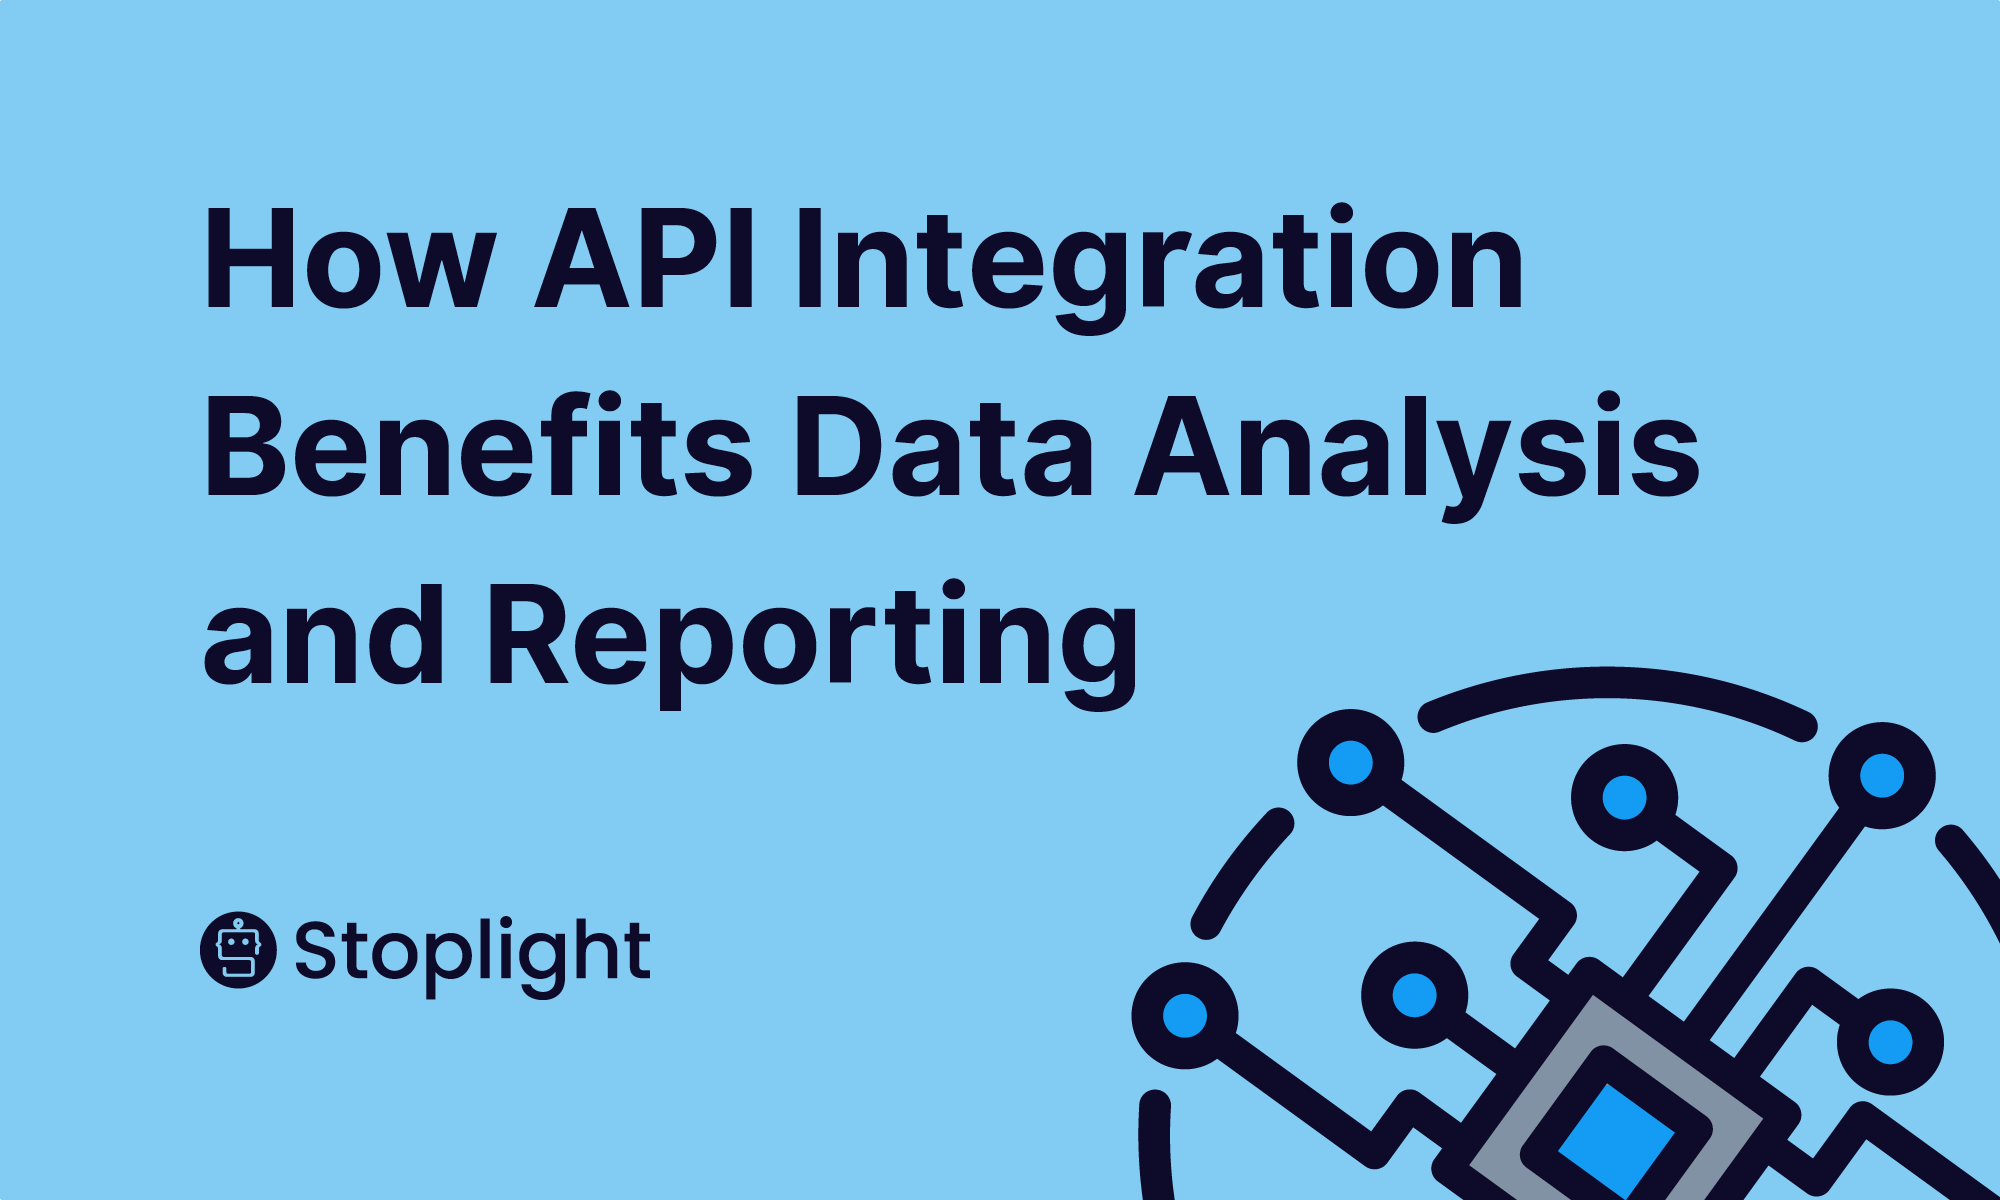 How API Integration Benefits Data Analysis and Reporting